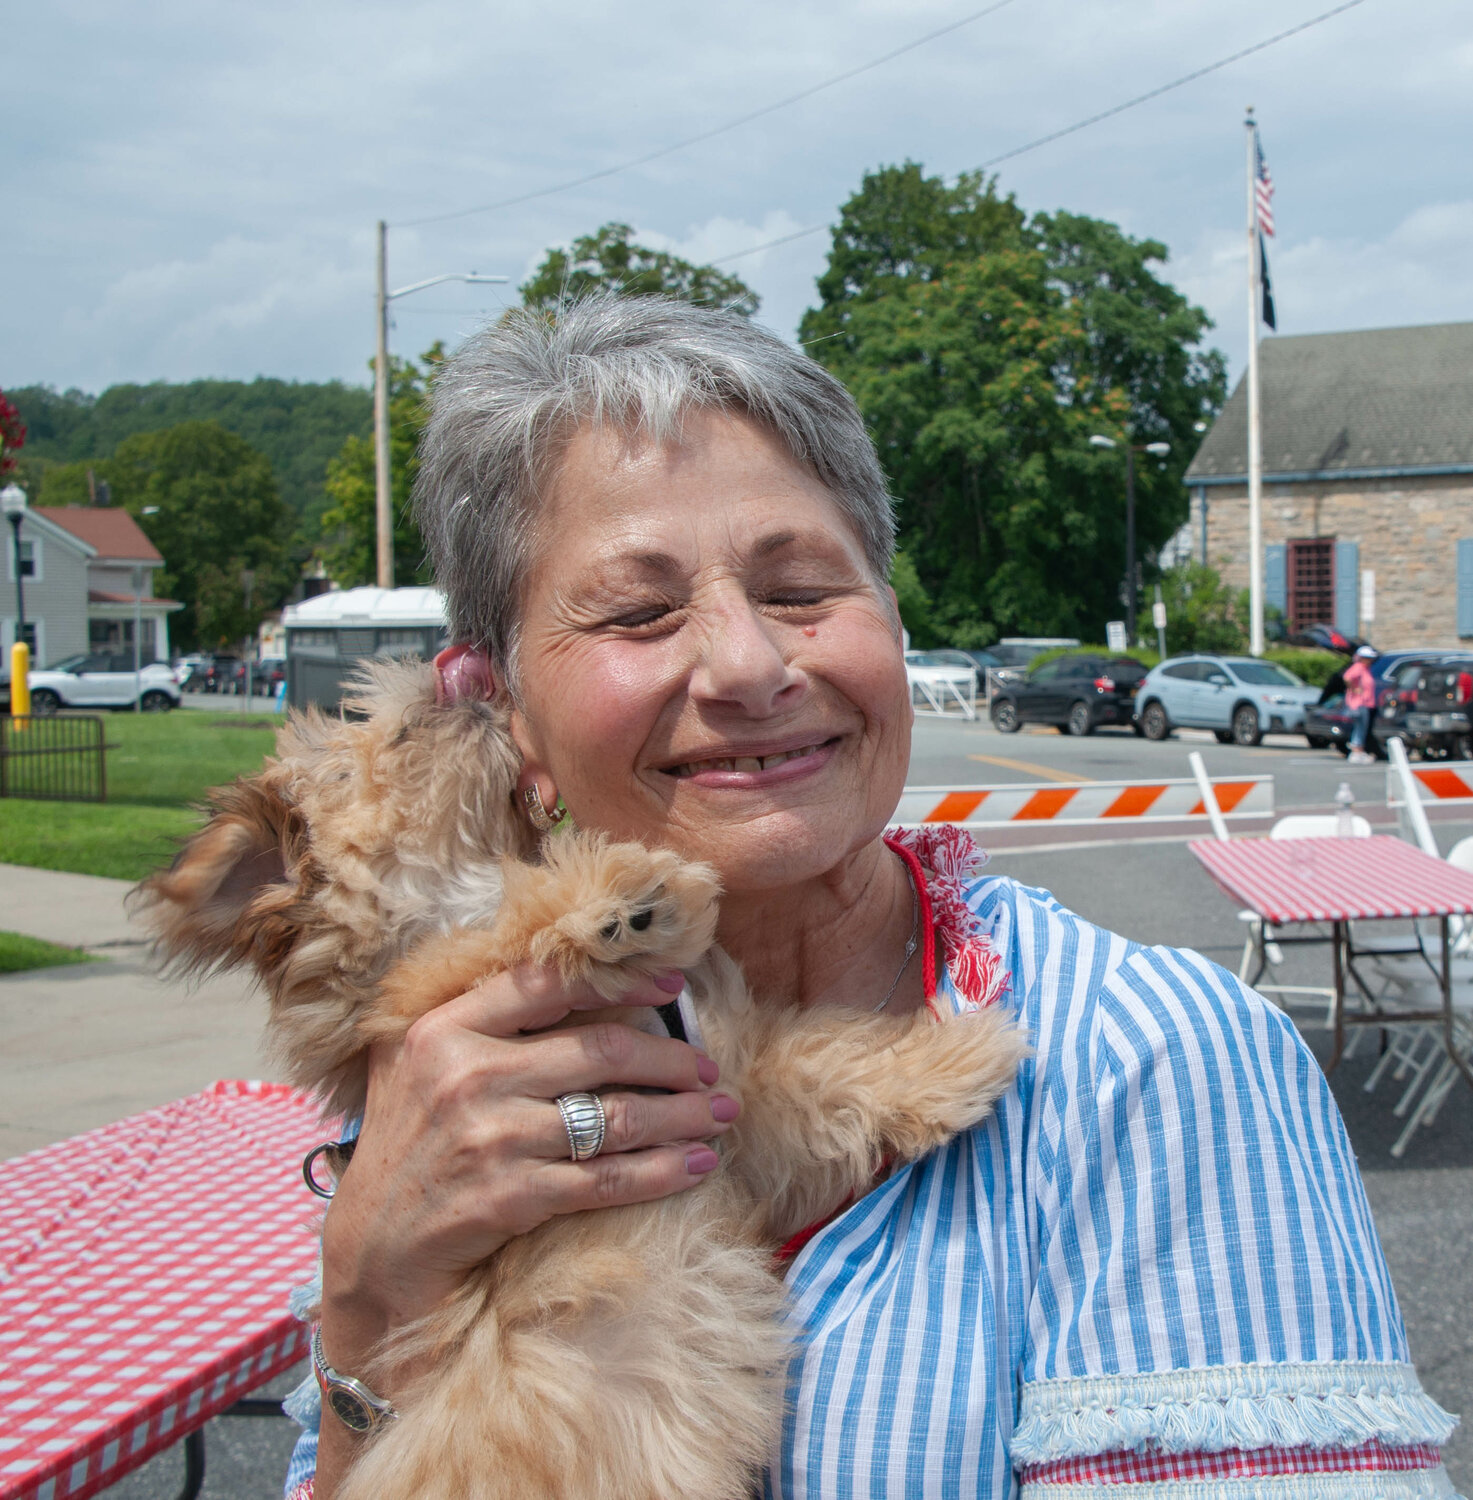 That Dog Named Gidget stepped out of her ice-cooled stroller (don't judge!) to give Borscht Belt Festival organizer and museum vice president Robin Cohen Kauffman a nice lick.